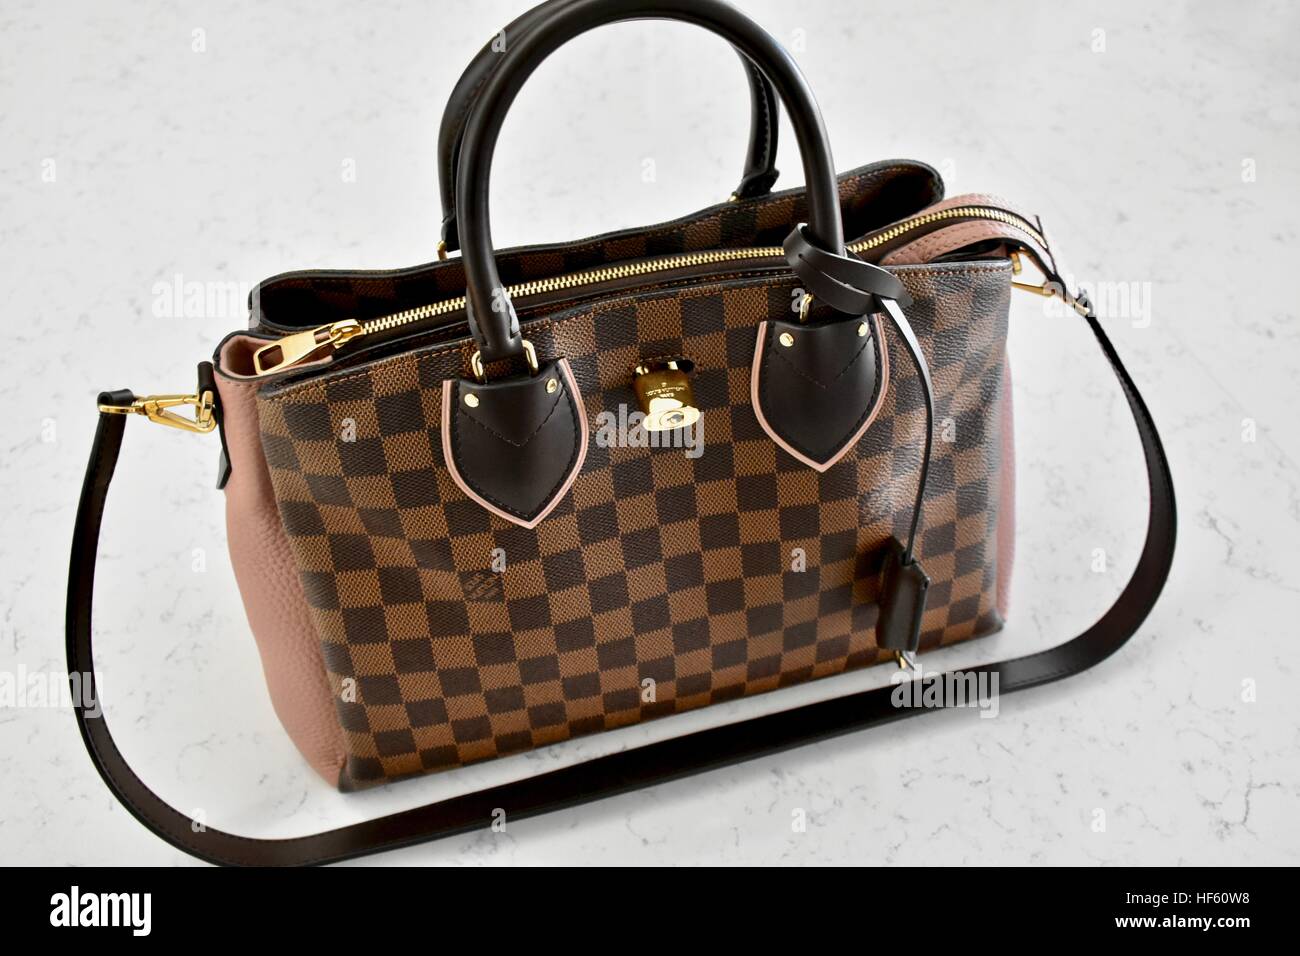 A Louis Vuitton handbag displayed on a white carrera marble background Stock Photo